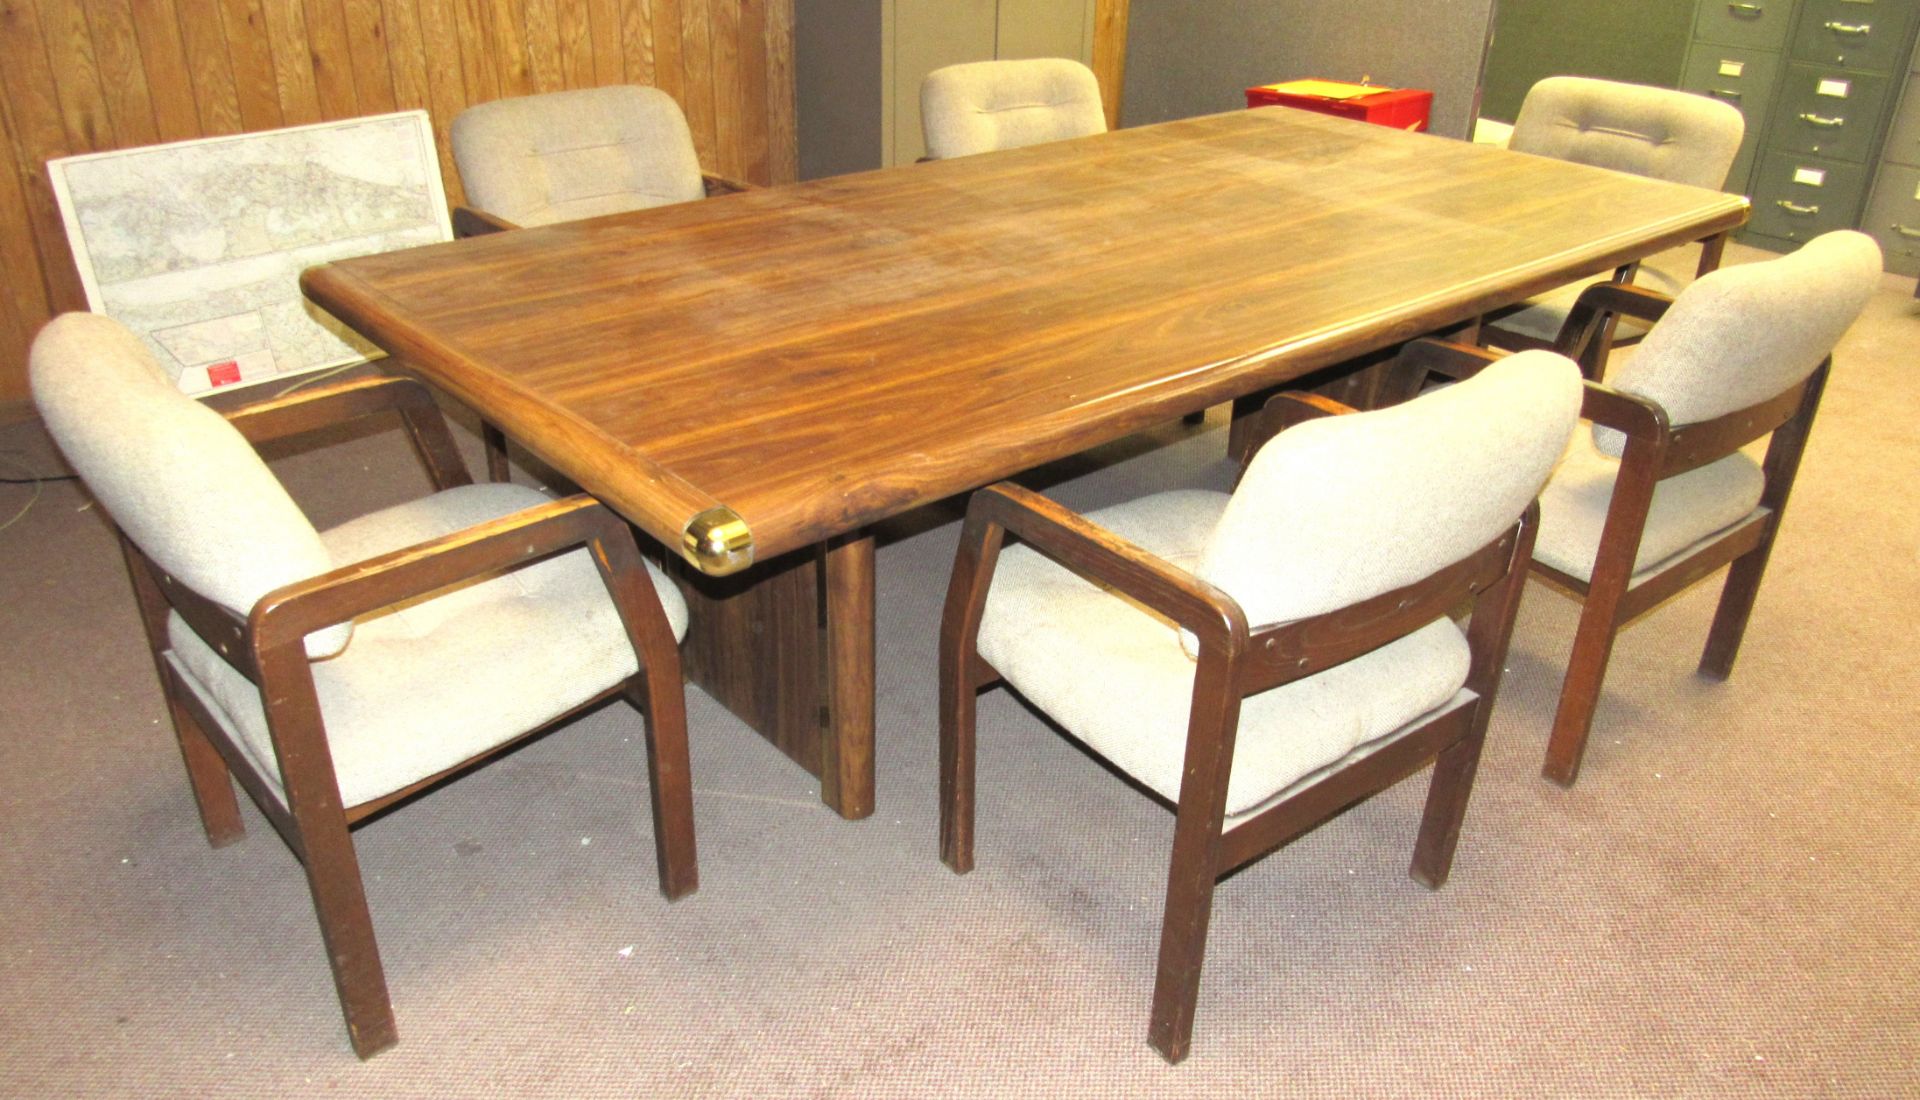 CONFERENCE TABLE w/ Chairs